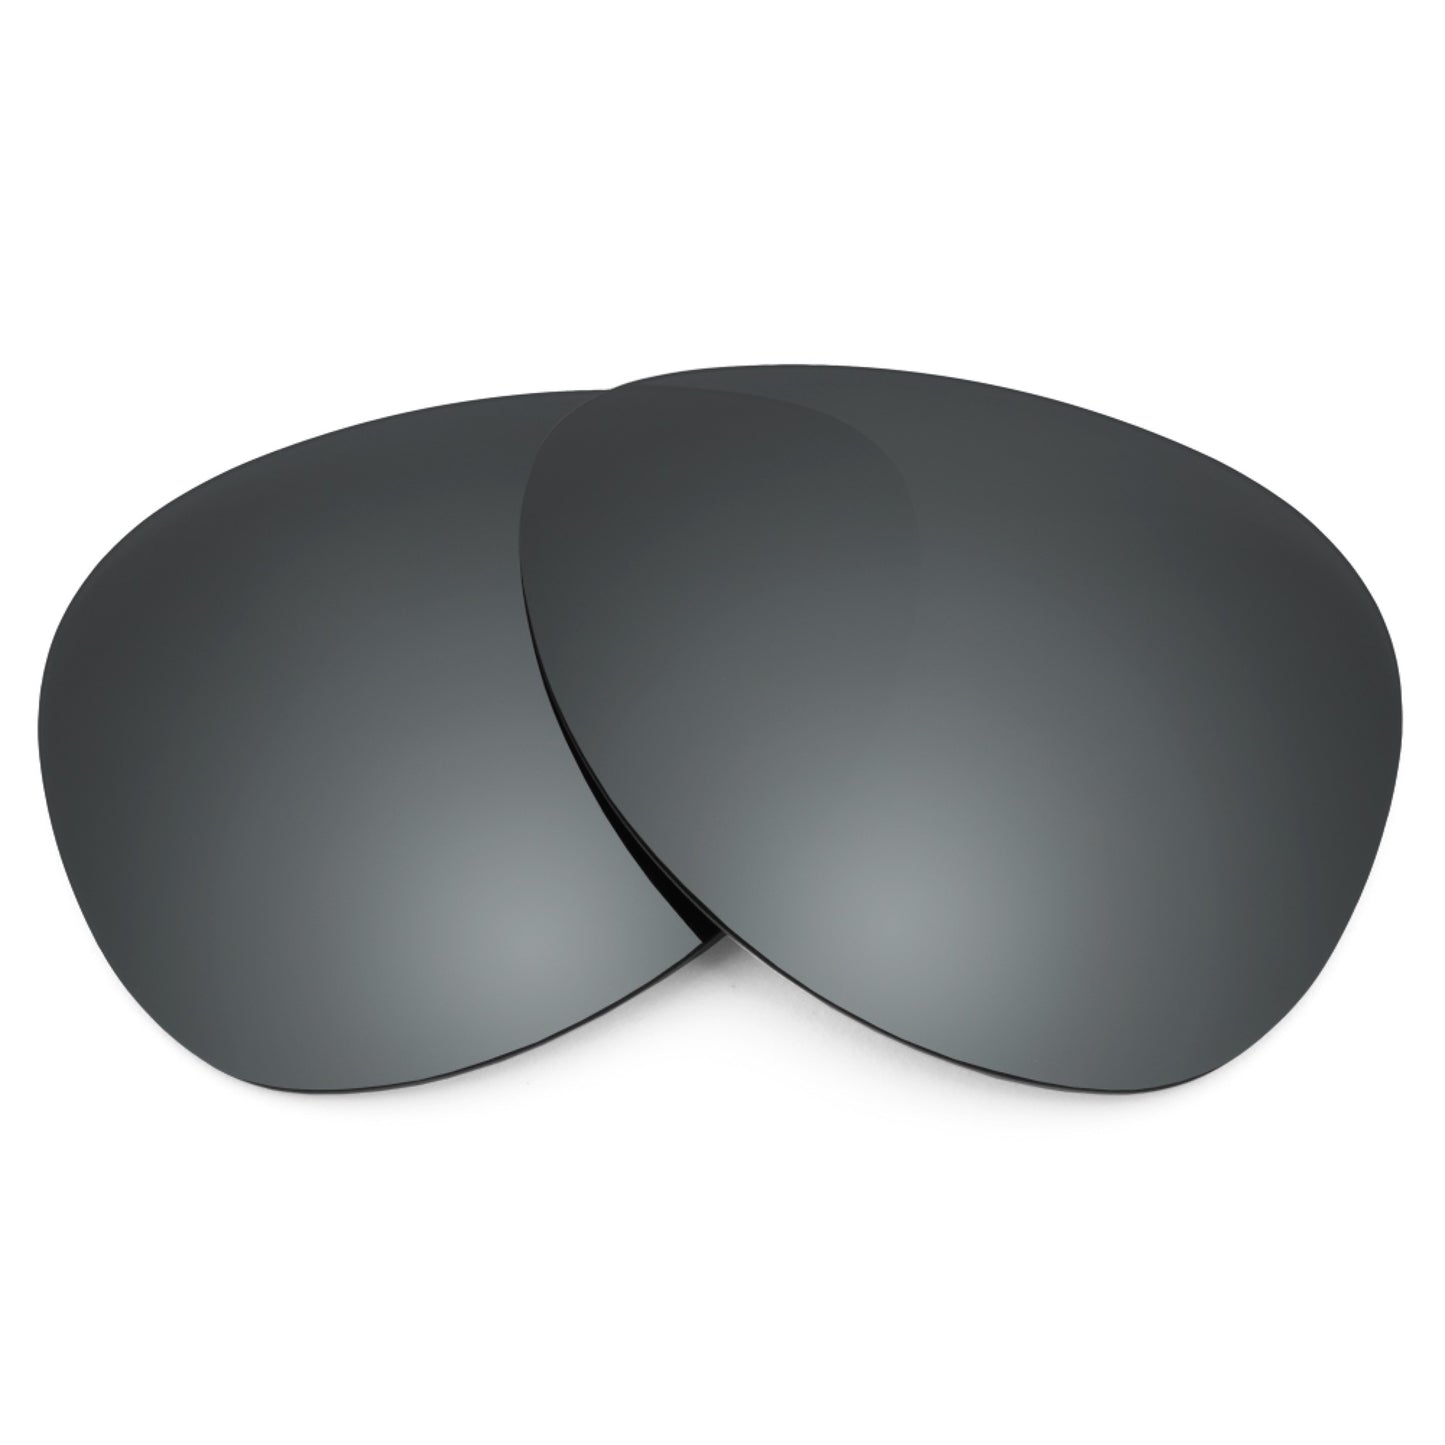 Revant replacement lenses for Ray-Ban Aviator RB3025 58mm Polarized Black Chrome